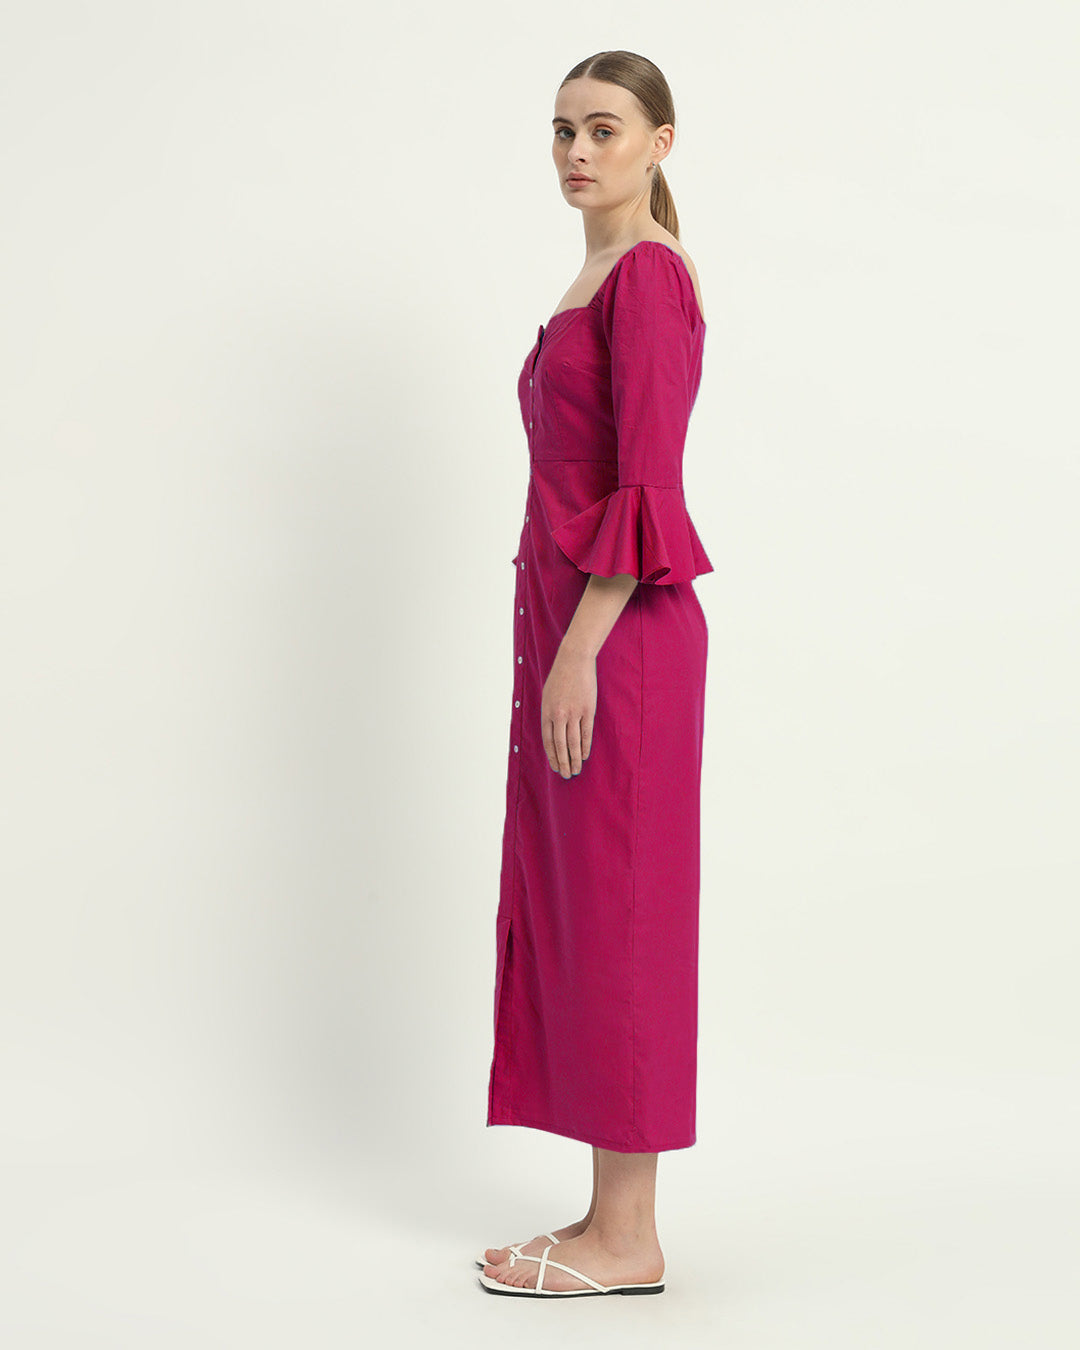 The Berry Rosendale Cotton Dress